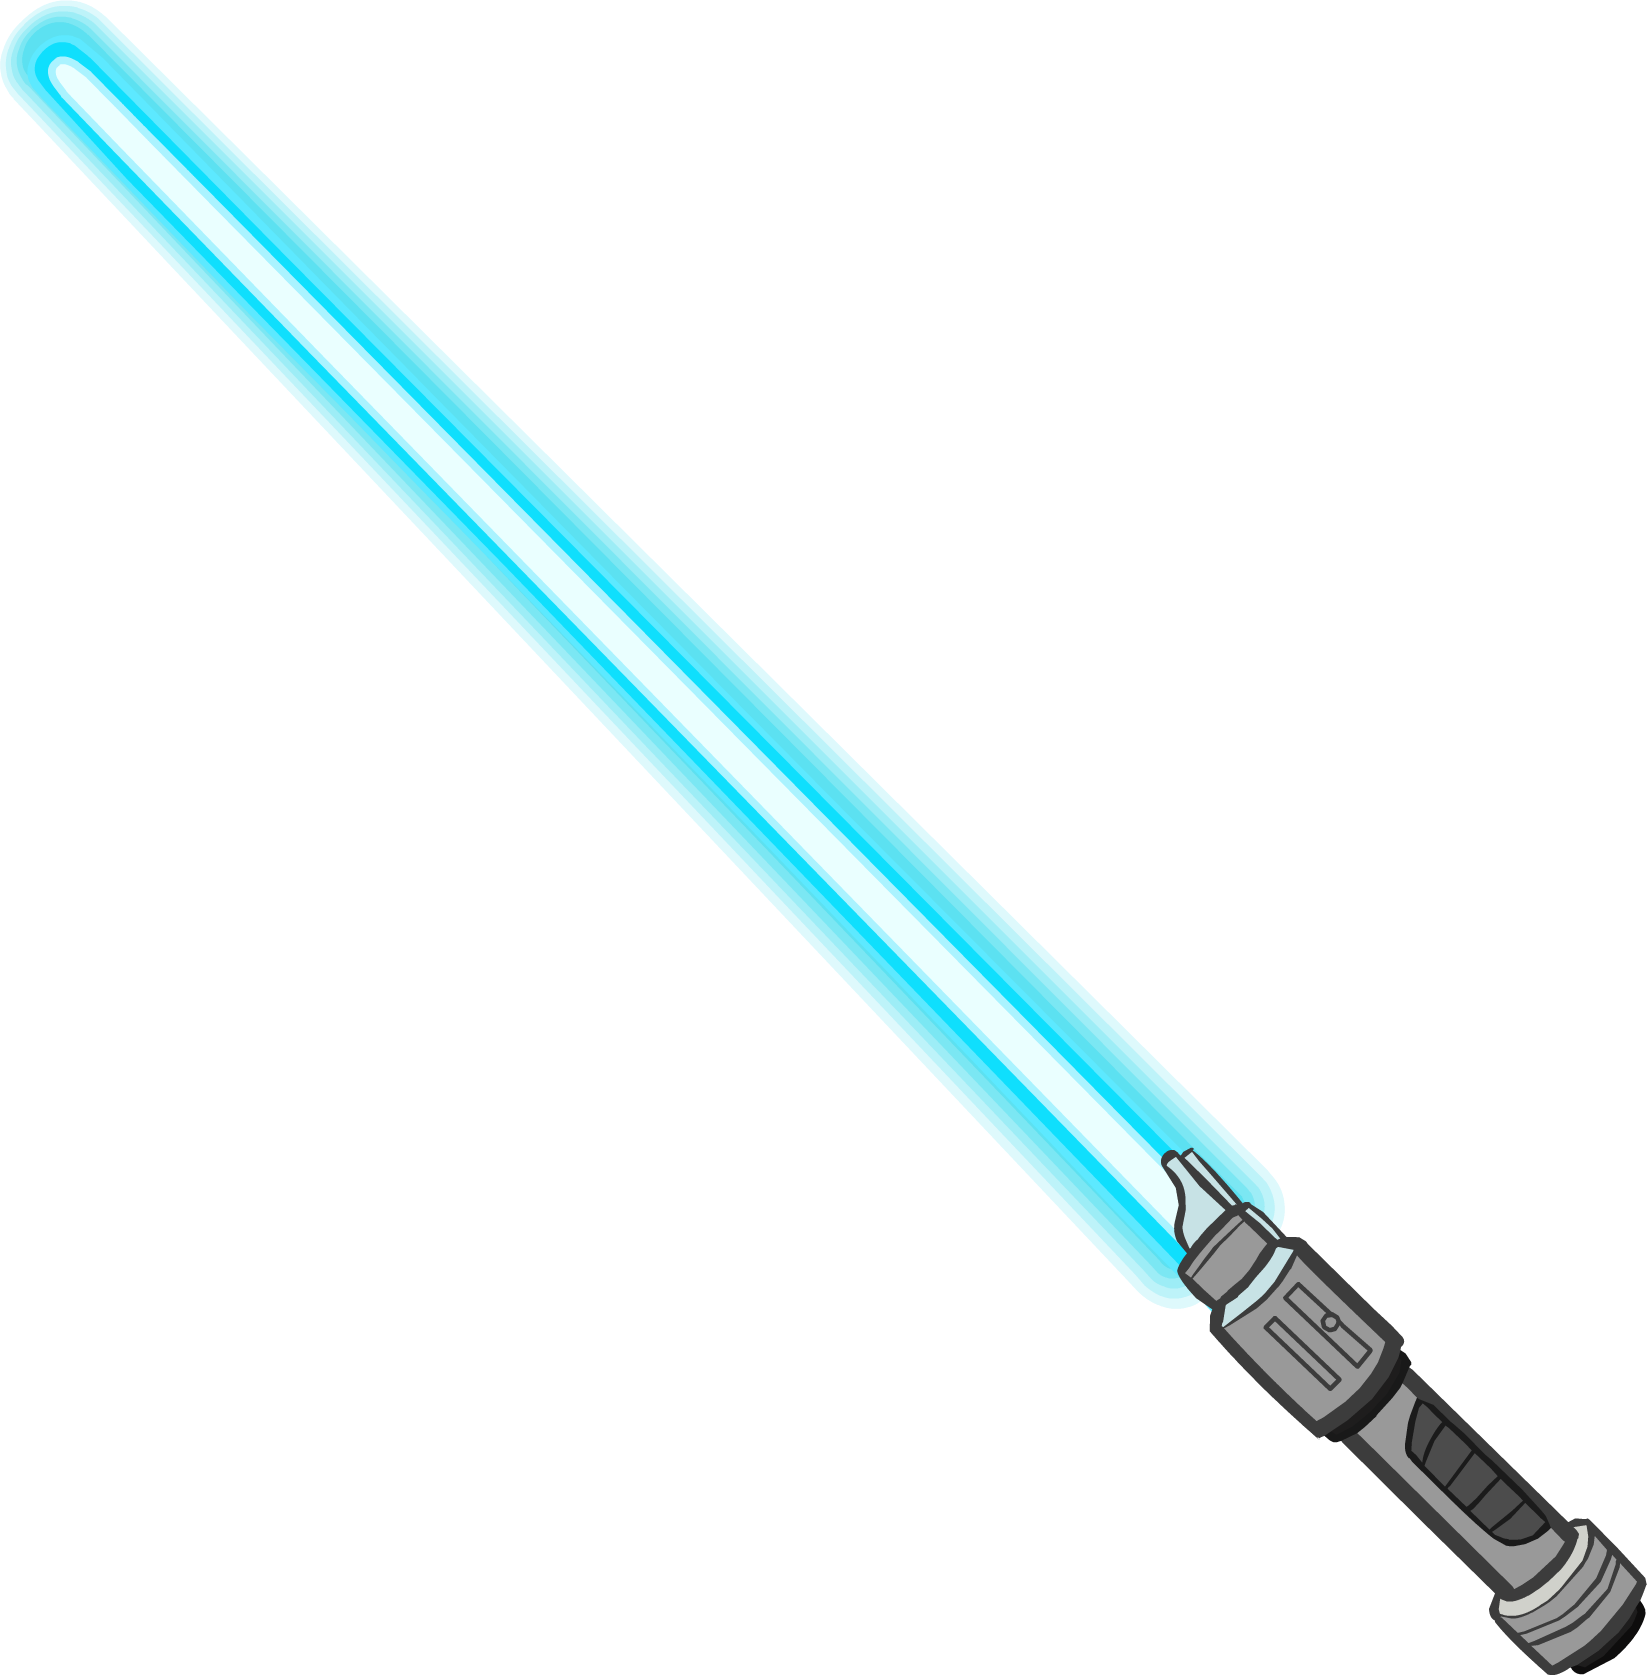 Download Blue Lightsaber Icon Sable De Luz Azul Png Png Image With No Background Pngkey Com